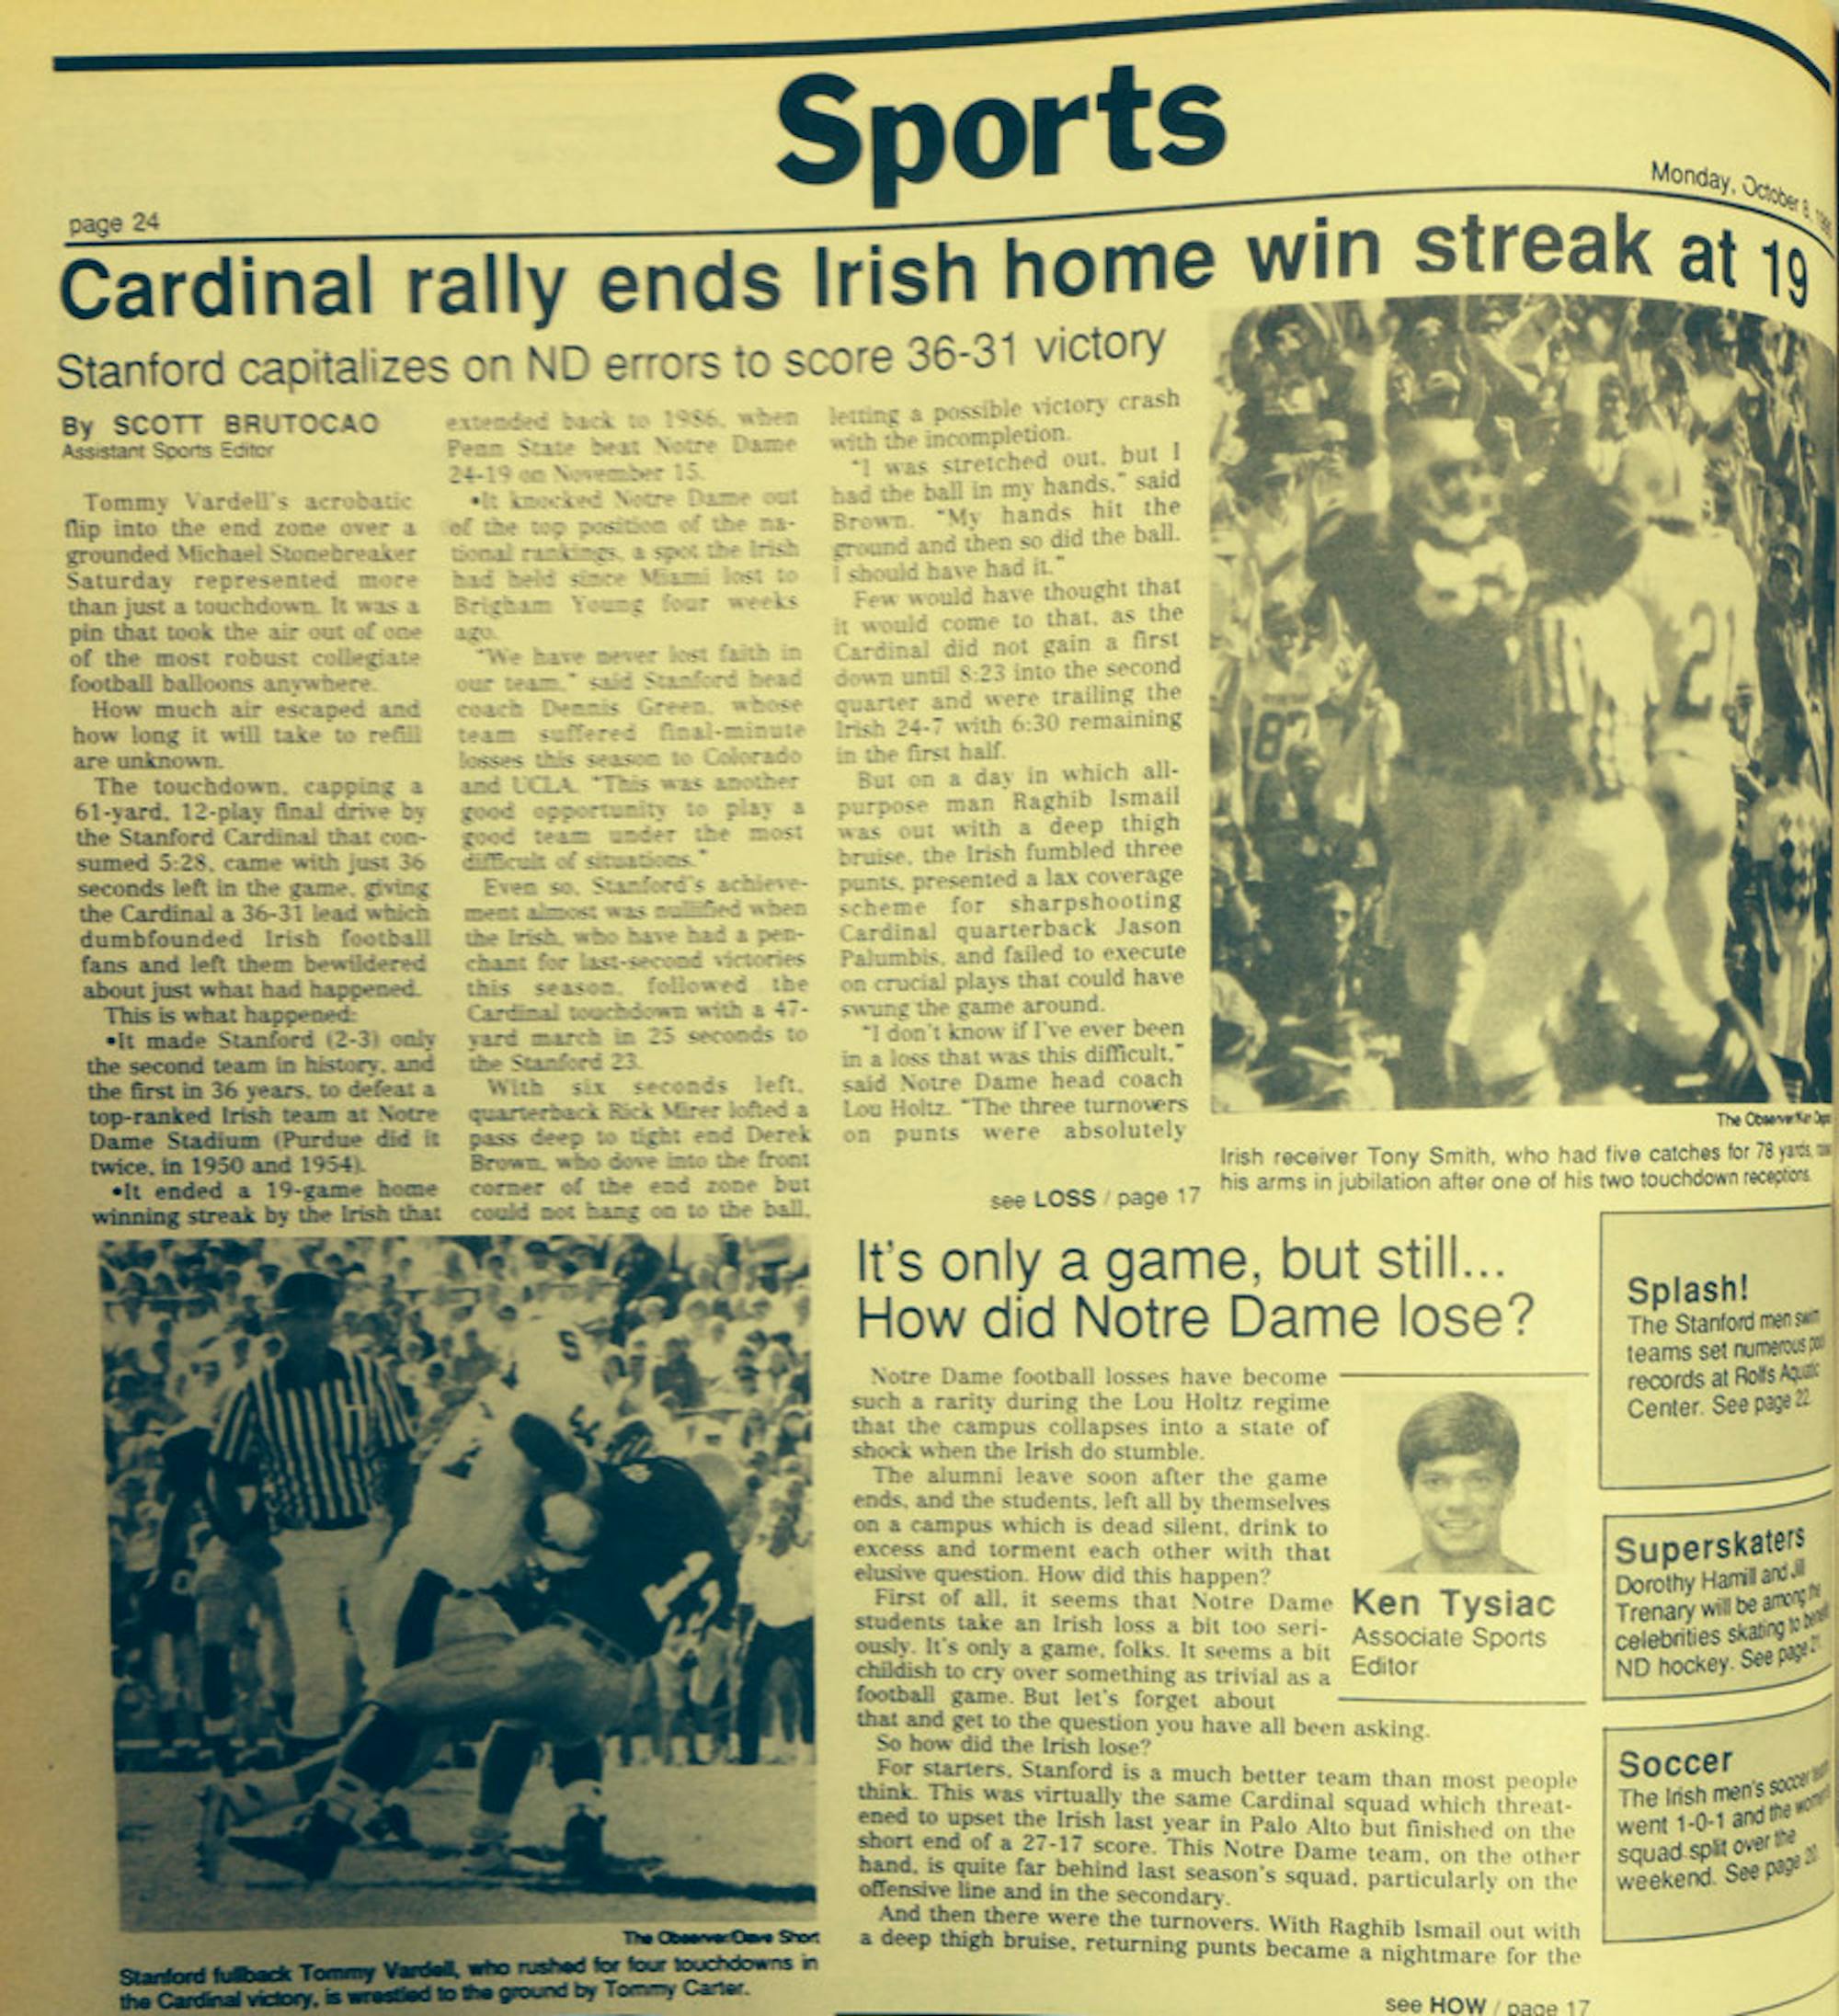 The Observer from Oct. 8, 1990.